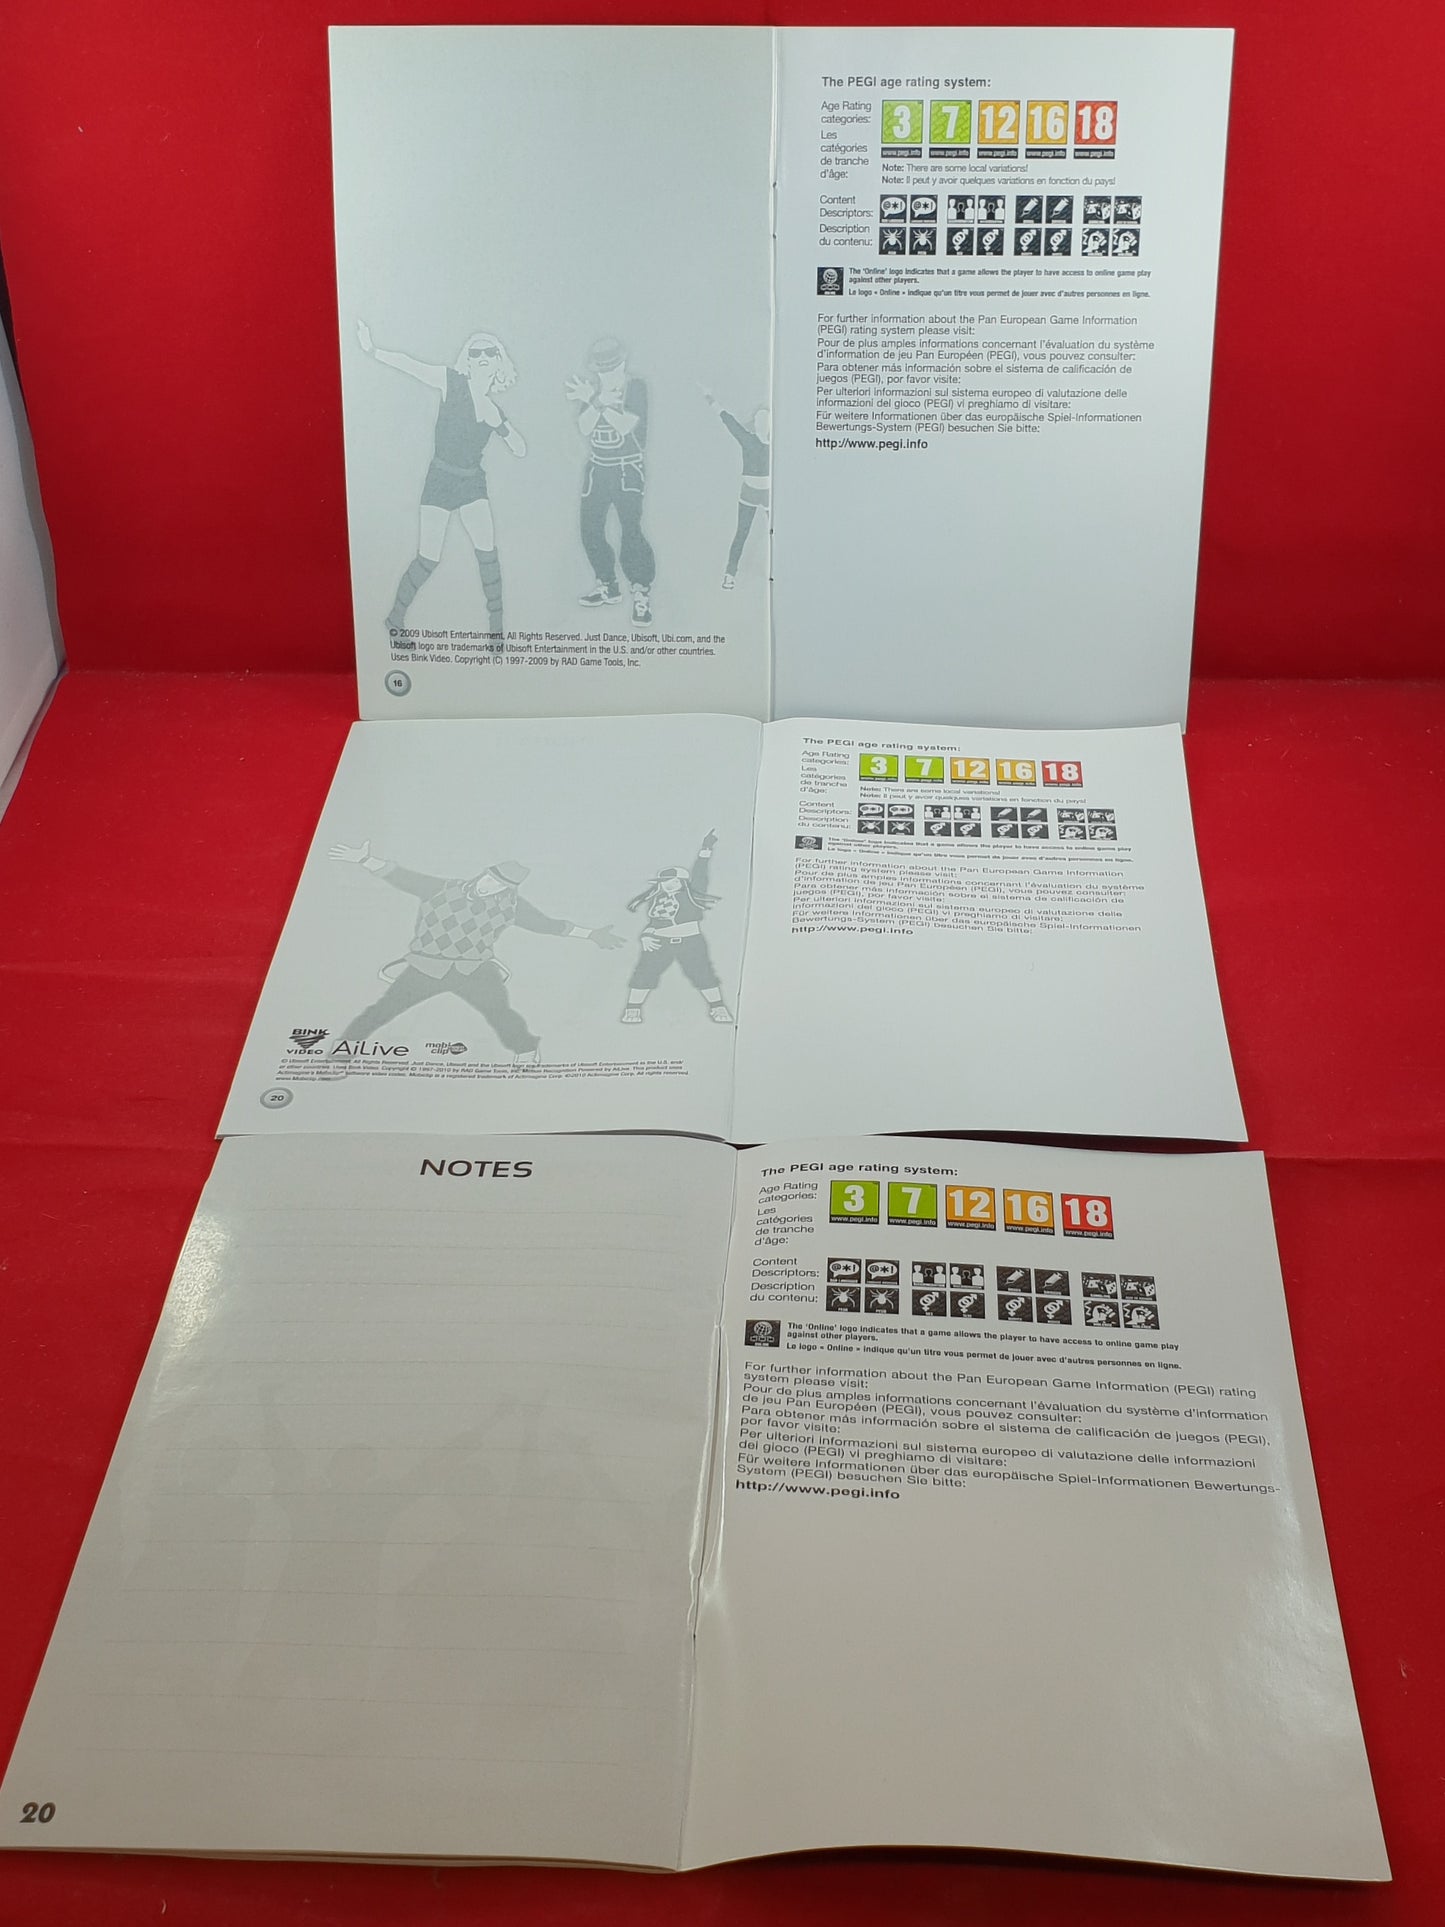 Just Dance 1, 2 & 3 Special Edition Nintendo Wii Game Bundle